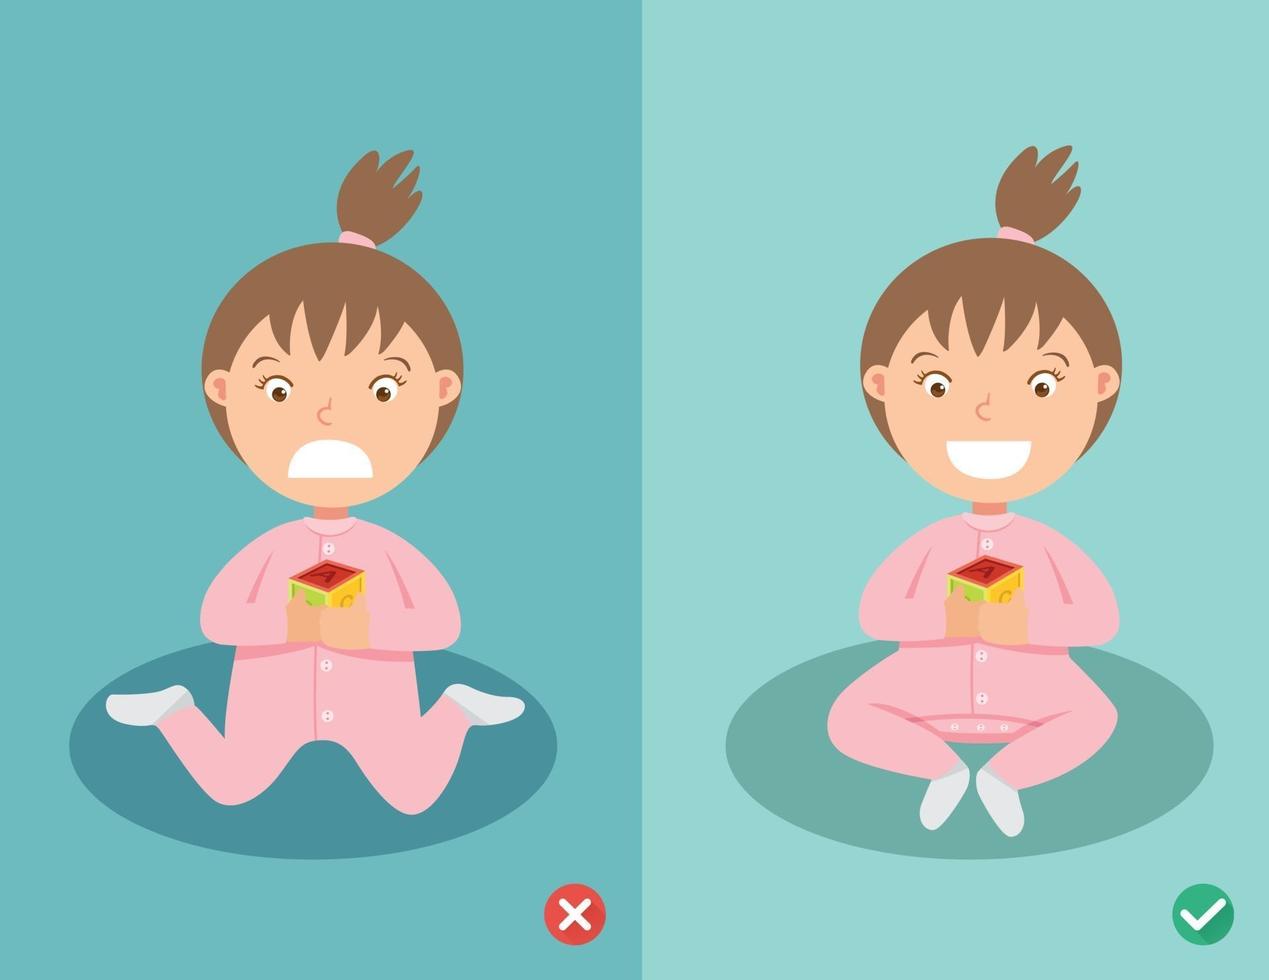 Right and wrong ways sitting position for child vector